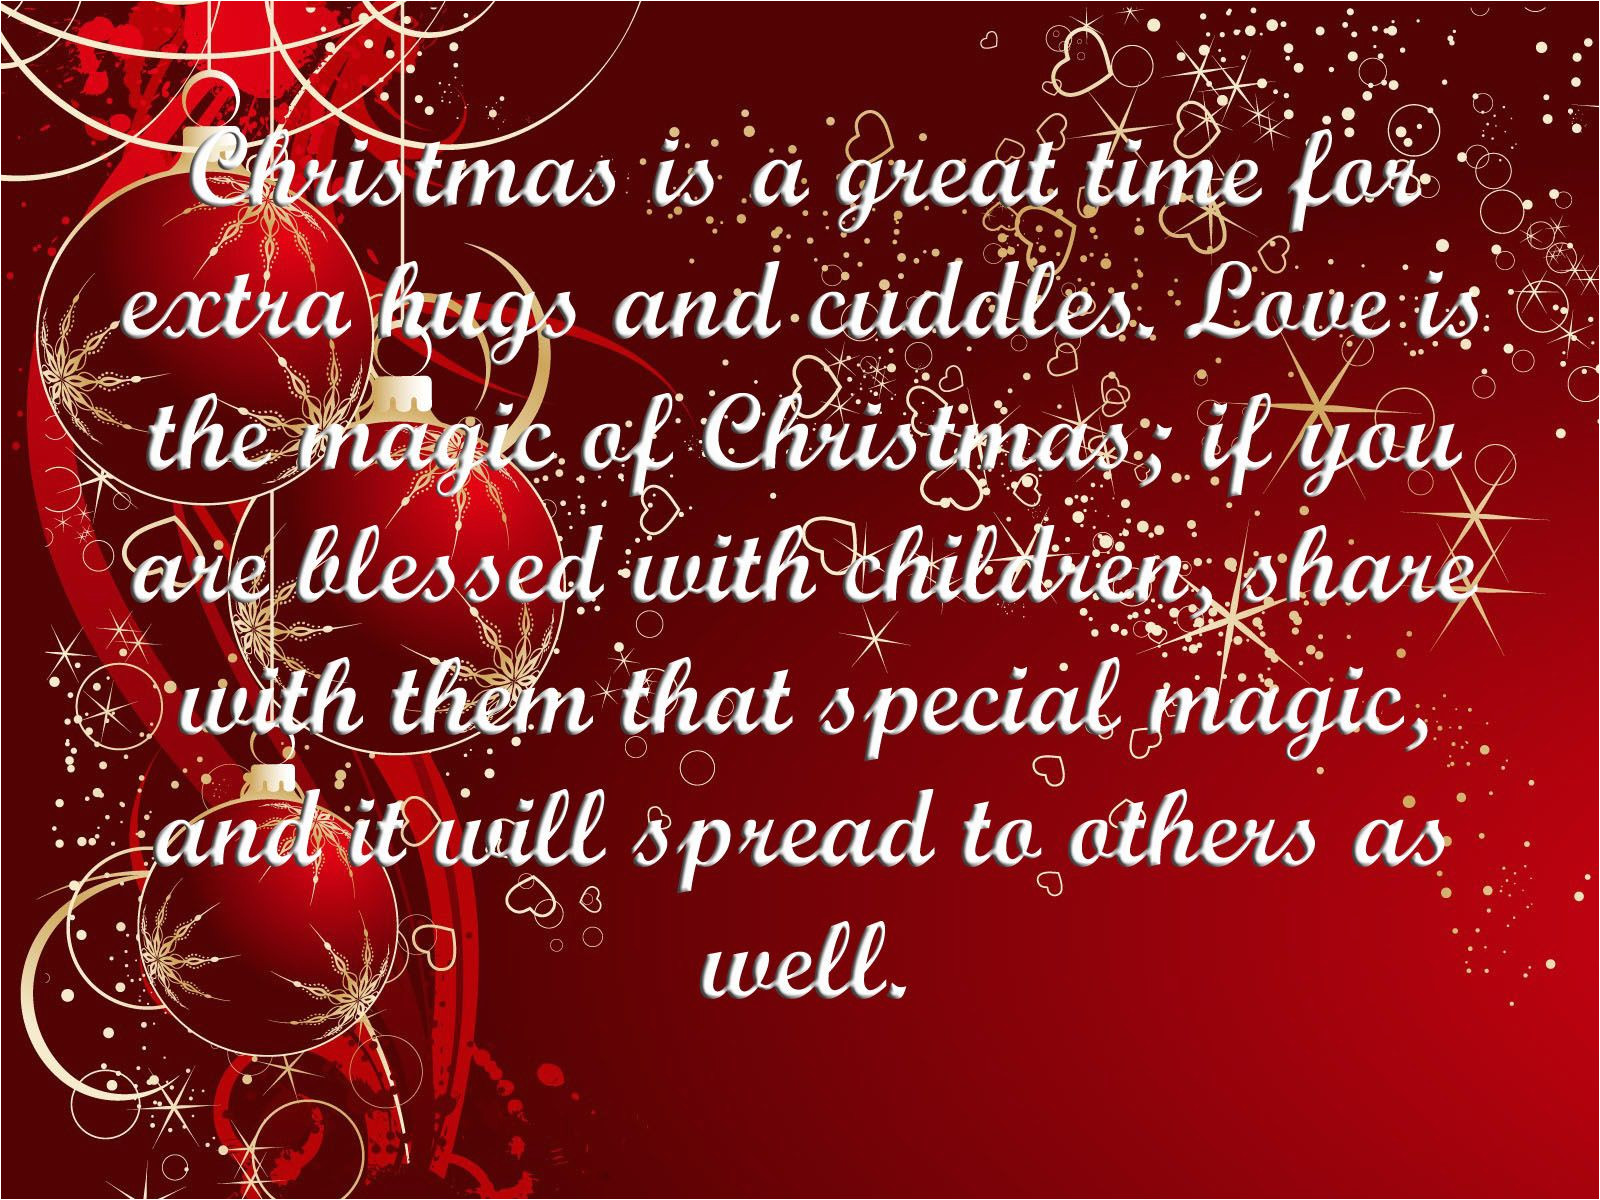 Christmas Quotes for Holiday Card Elegant Christmas Message Quotes and Greetings Best